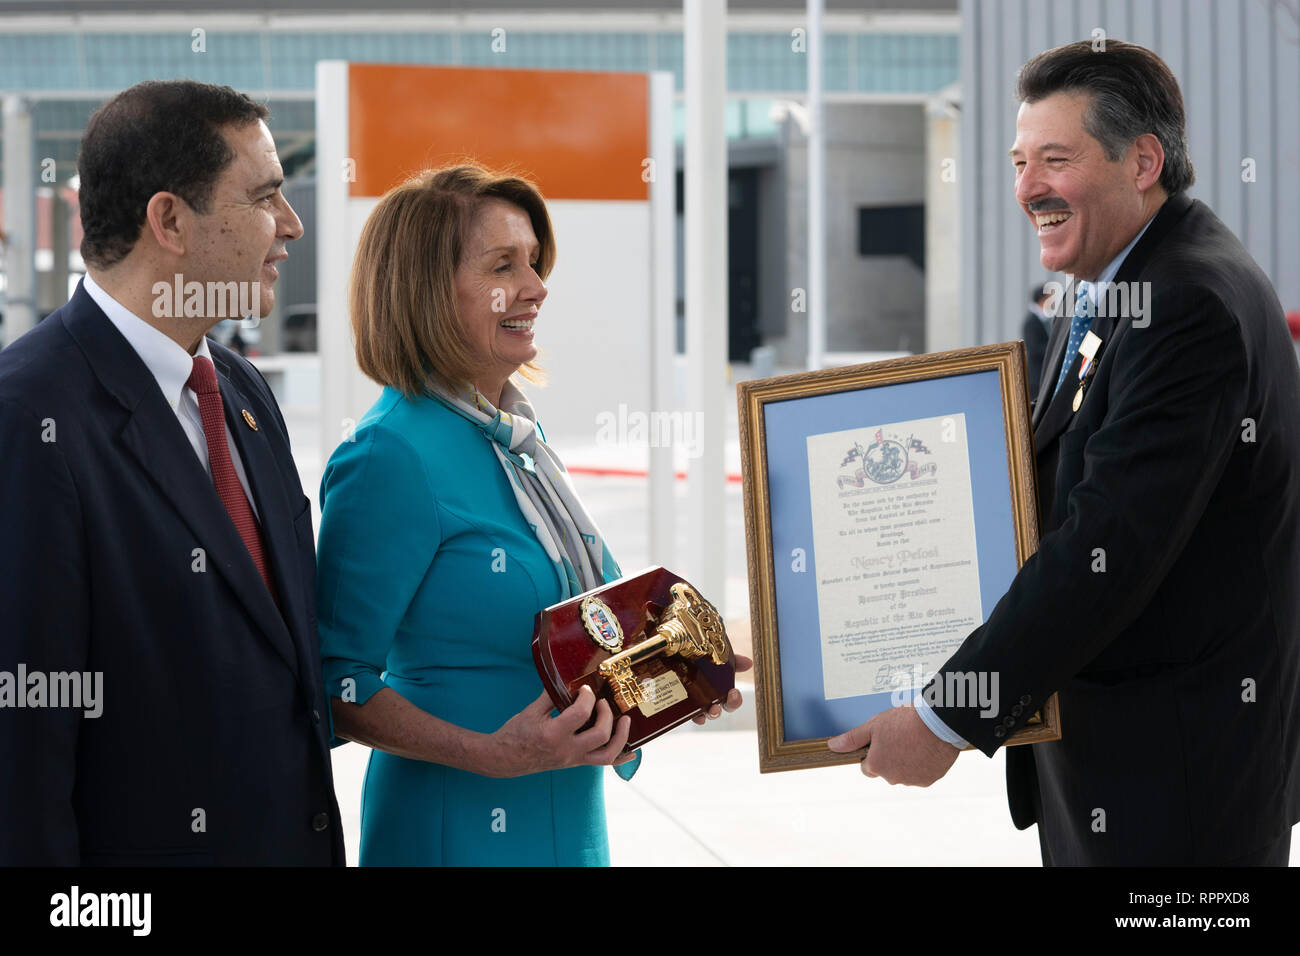 United States House of Representatives Speaker Nancy Pelosi (D-CA), receives a key to the city and ceremonial citation from Laredo Mayor Pete Saenz, right, as Laredo Congressman Henry Cuellar looks on during a press conference at the border between Laredo and Nuevo Laredo, Tamaulipas, Mexico. Stock Photo